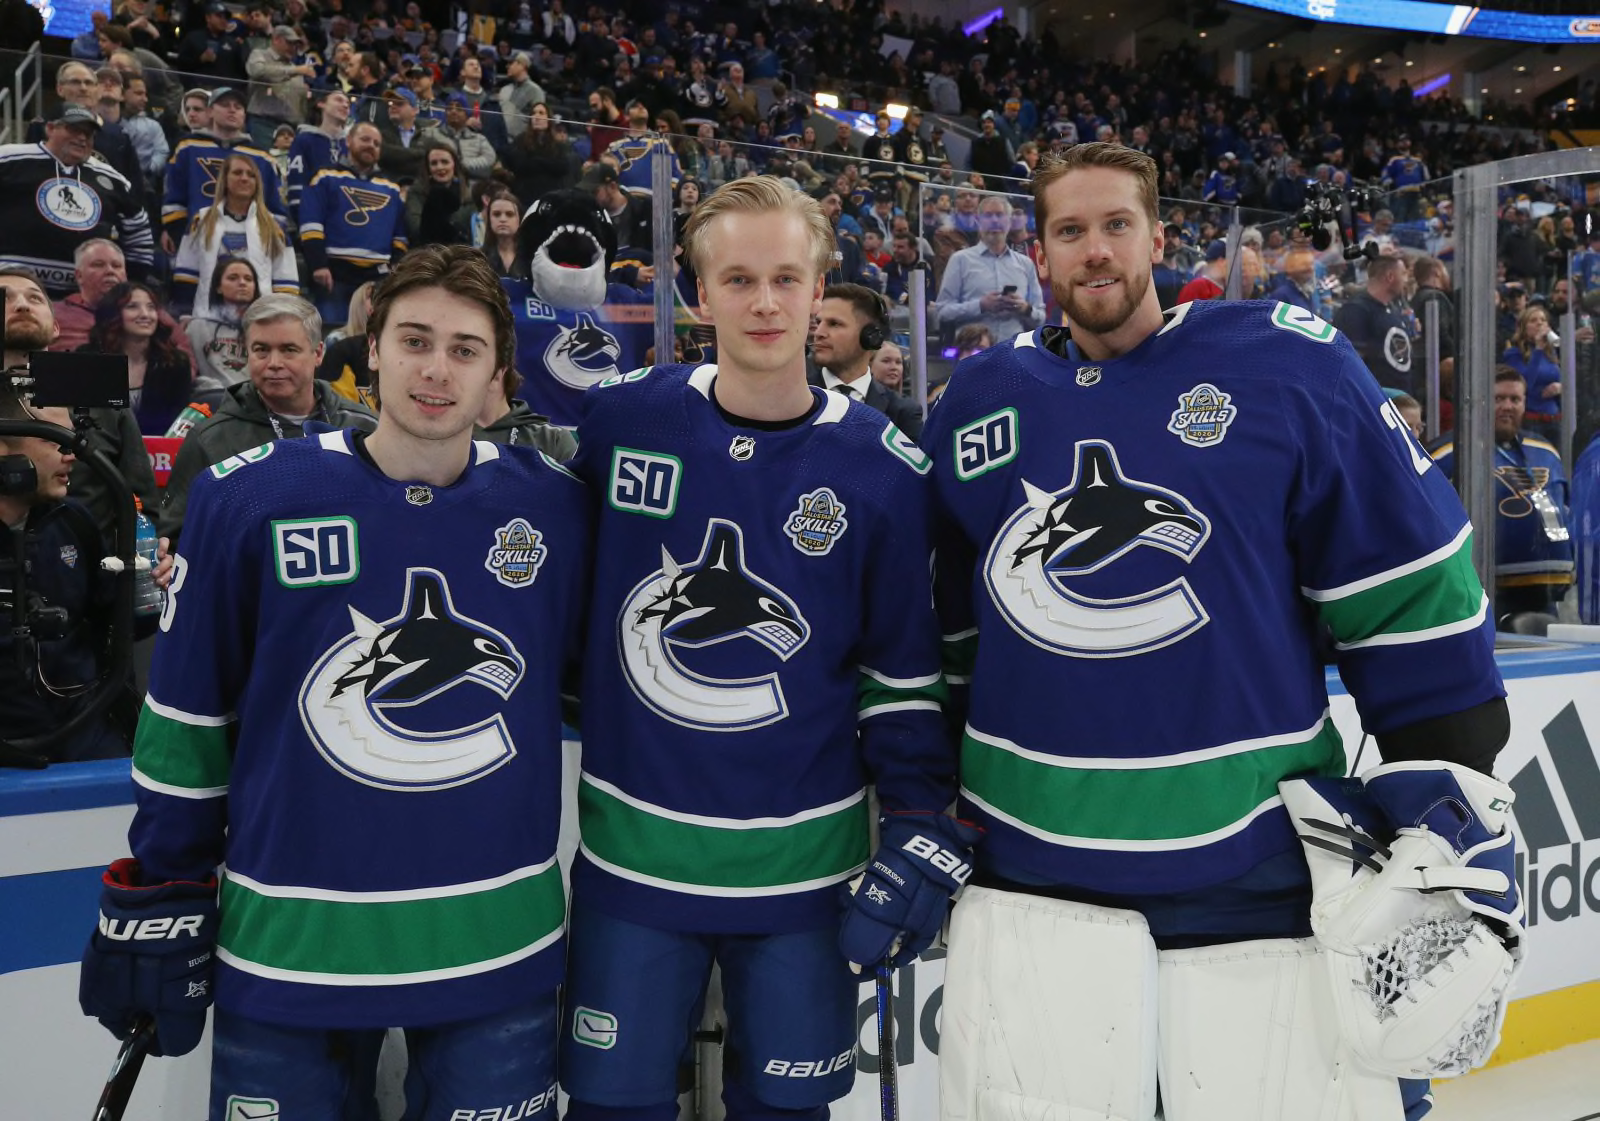 When should we start believing in this Canucks team? - Vancouver